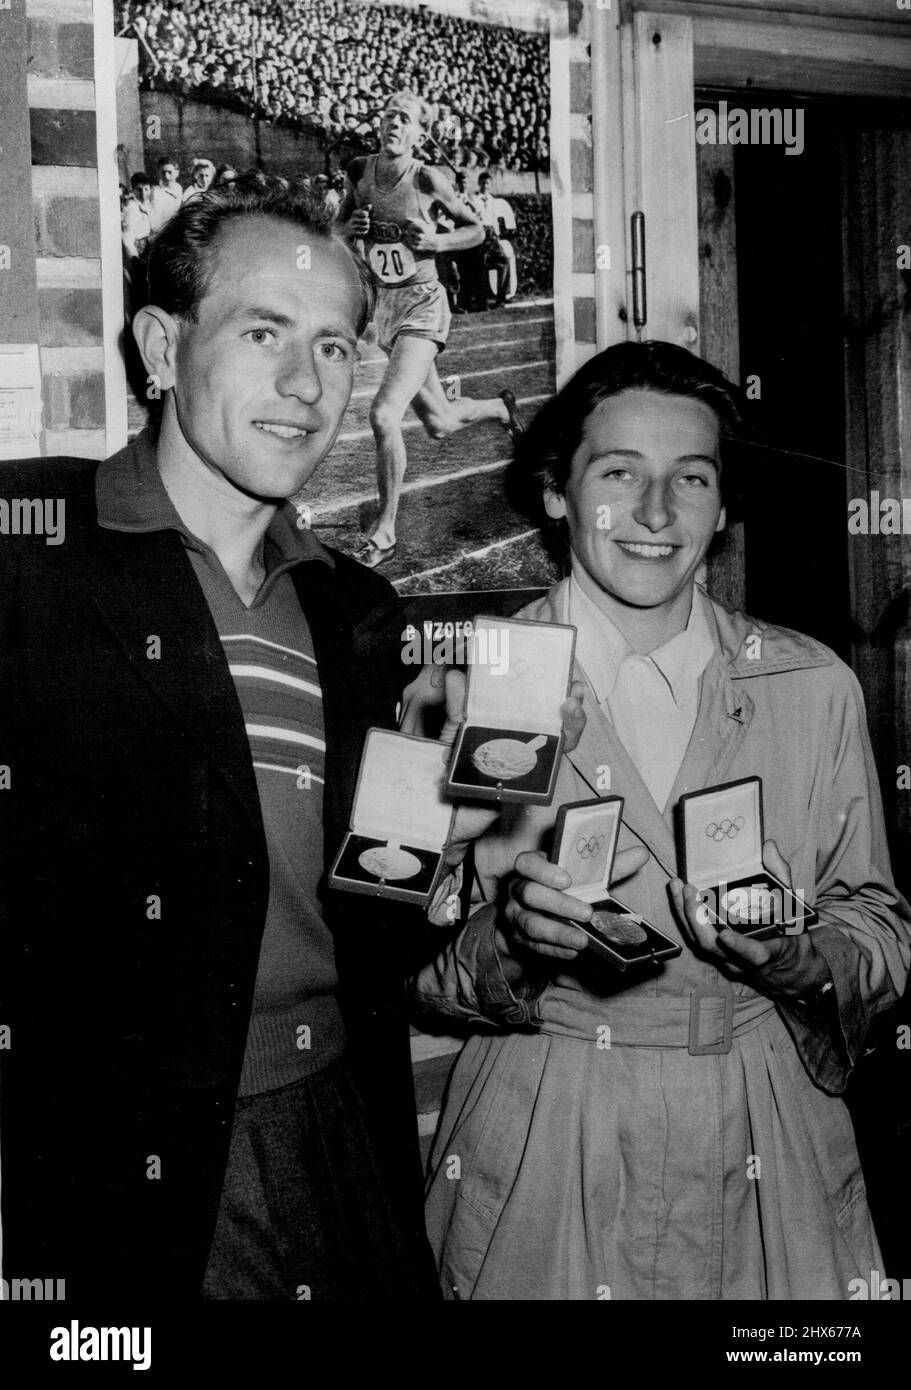 The Winning Zatopeks -- Emil Zatopek of Czechoslovakia, winner of the Olympic Games 5,000 metres, 10,000 metres and marathon, with his wife Dana Zatopkova, who won the ladies javelin event, show their four gold medals at the Otaniemi *****. In background is an Olympic action picture of Zatopek. July 31, 1952. Stock Photo